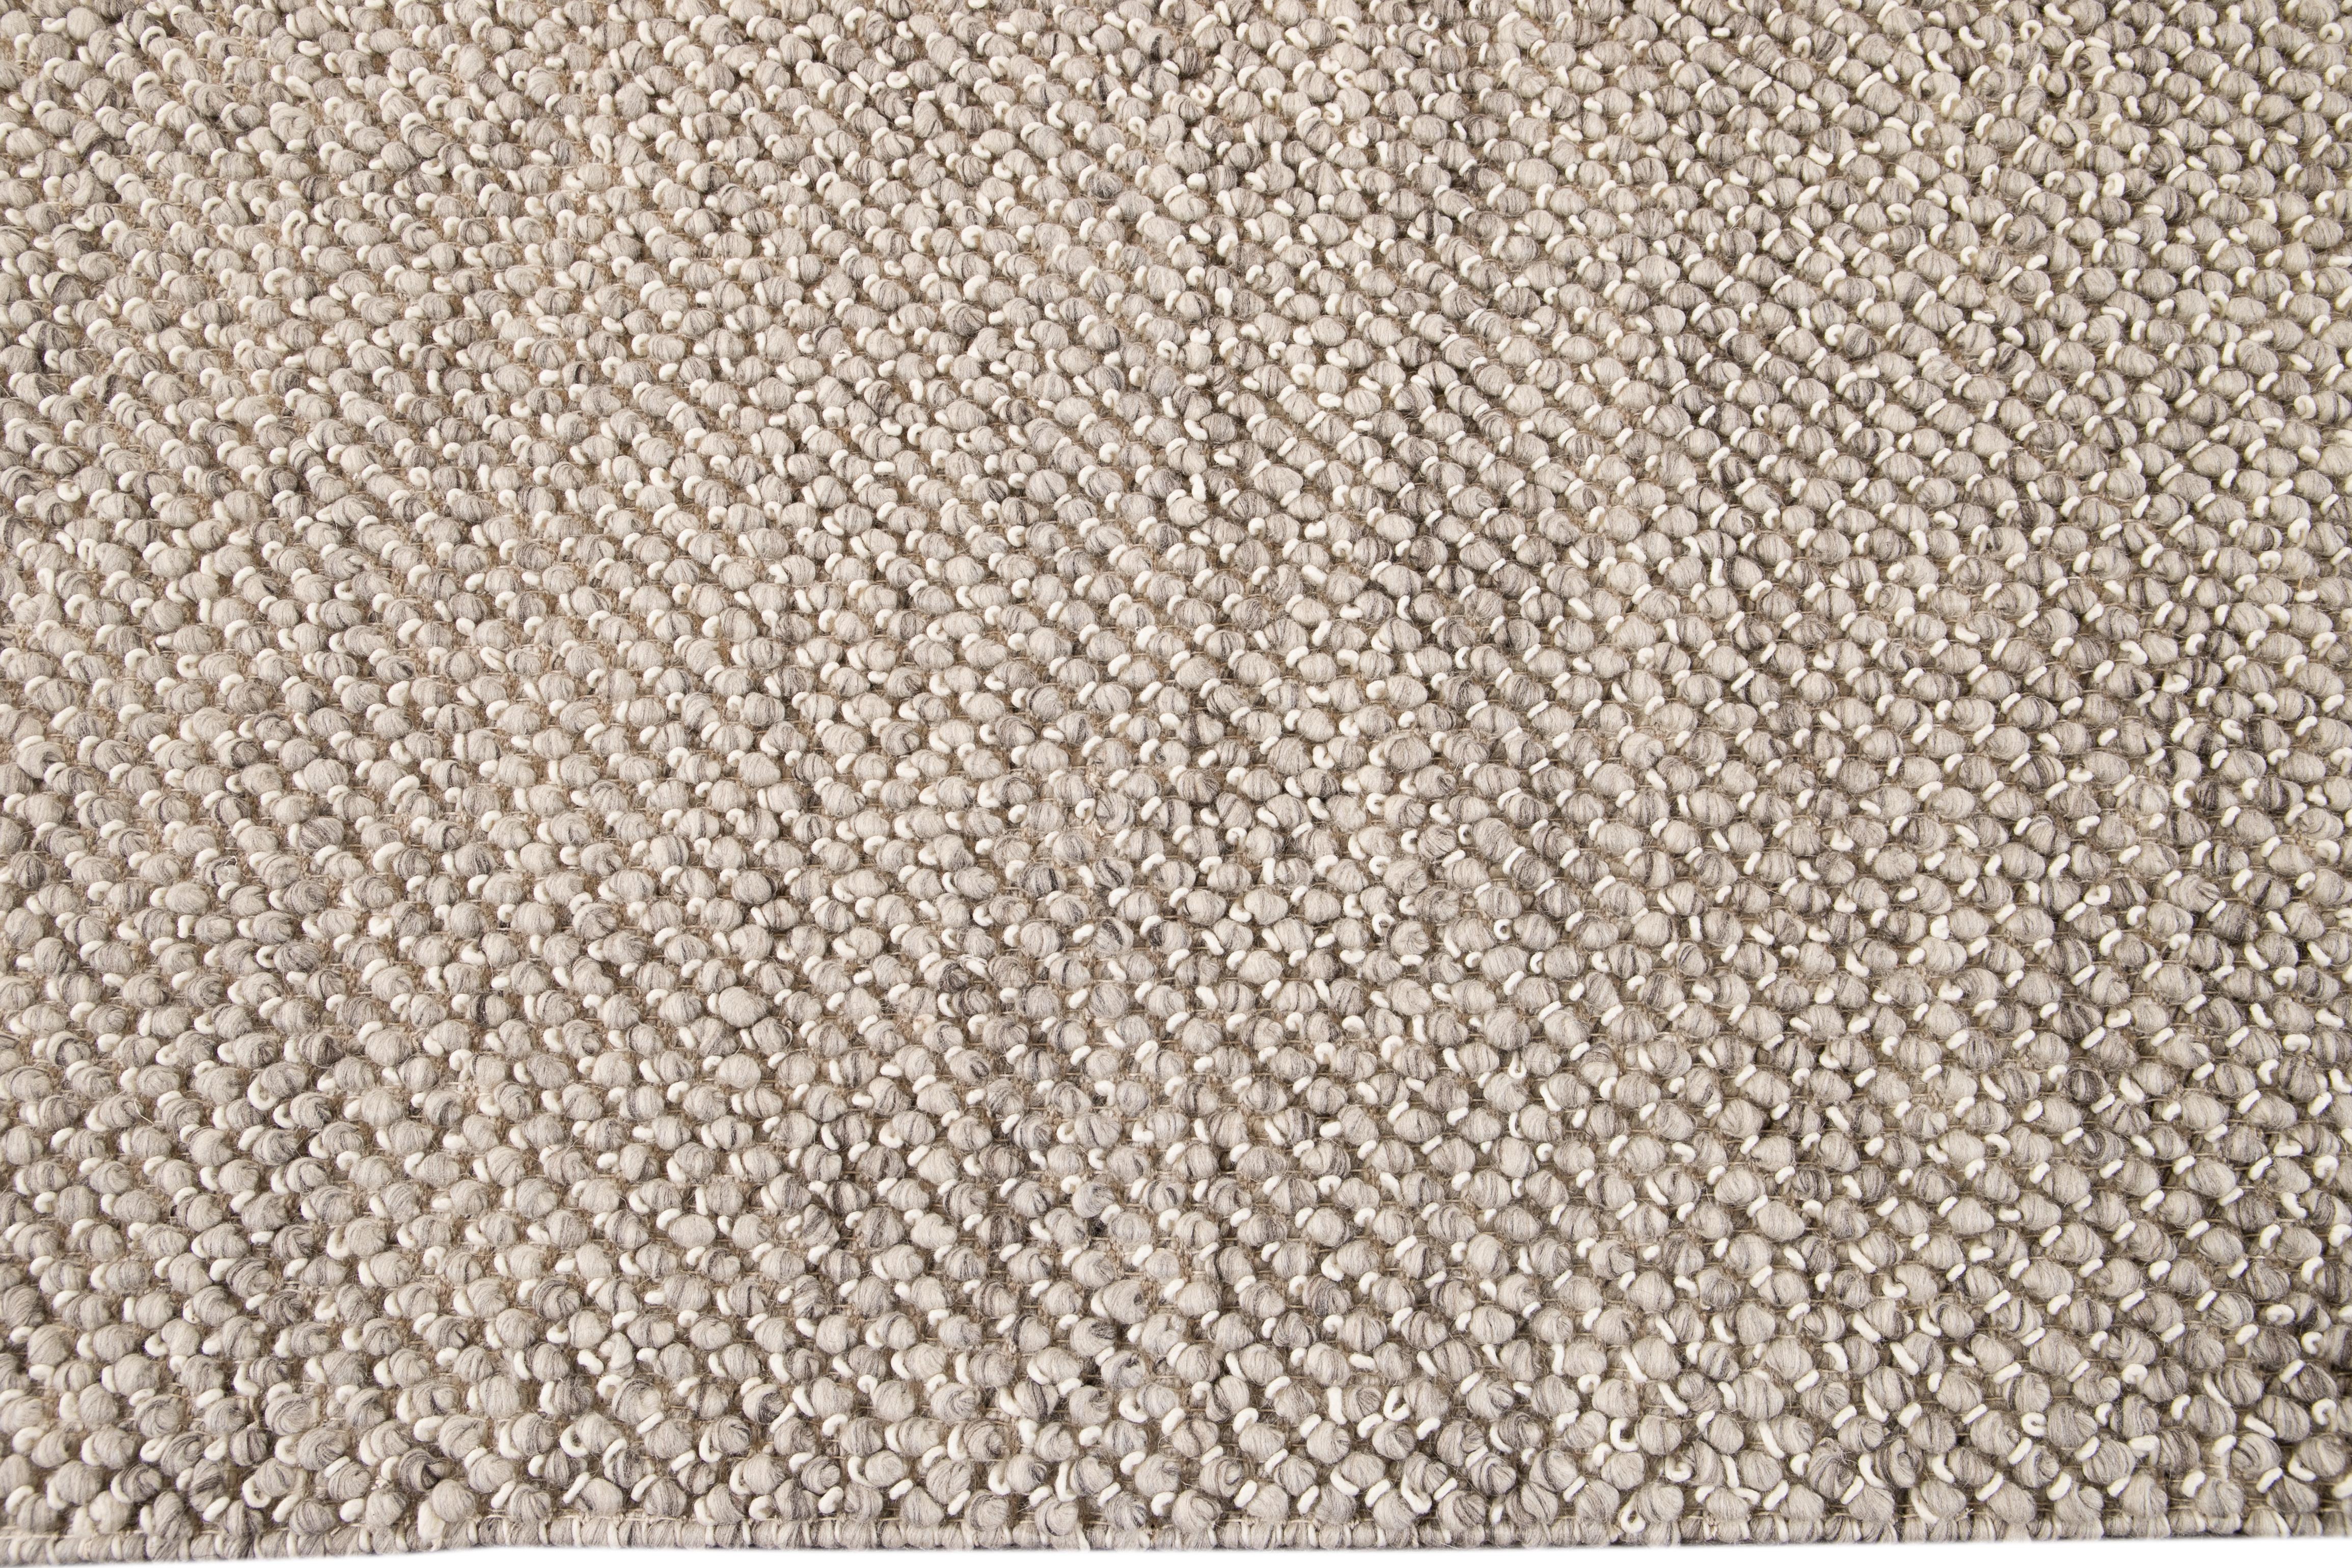 Beautiful Contemporary Textured Rug, hand-knotted wool with a tan field and subtle gray accents.

This rug measures 12' 0